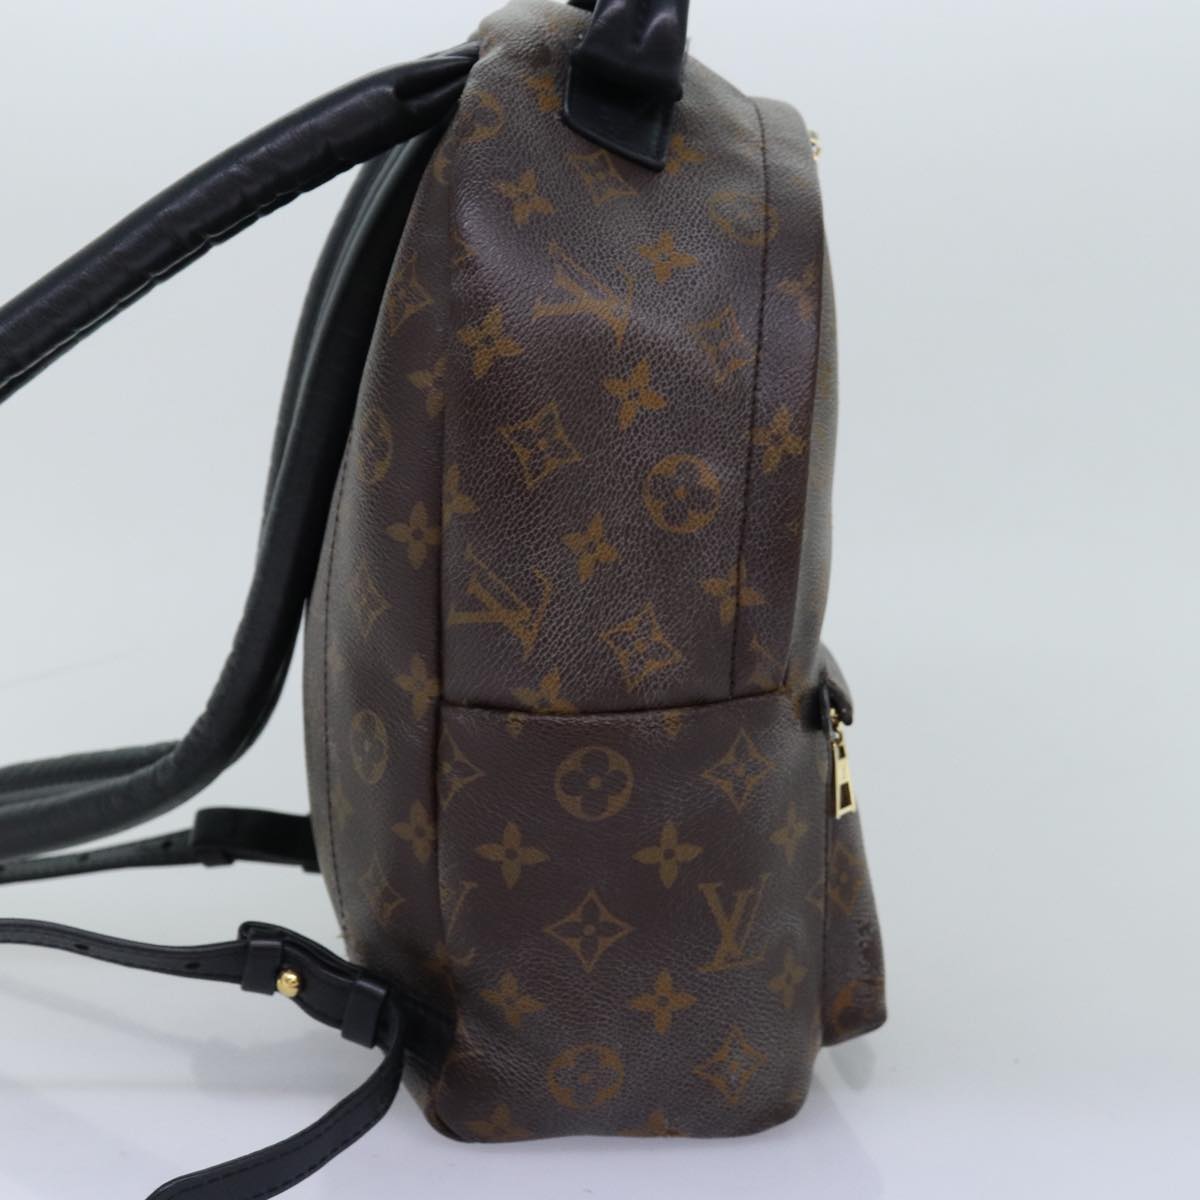 LOUIS VUITTON Monogram Palm Springs PM Backpack M41560 LV Auth 73715